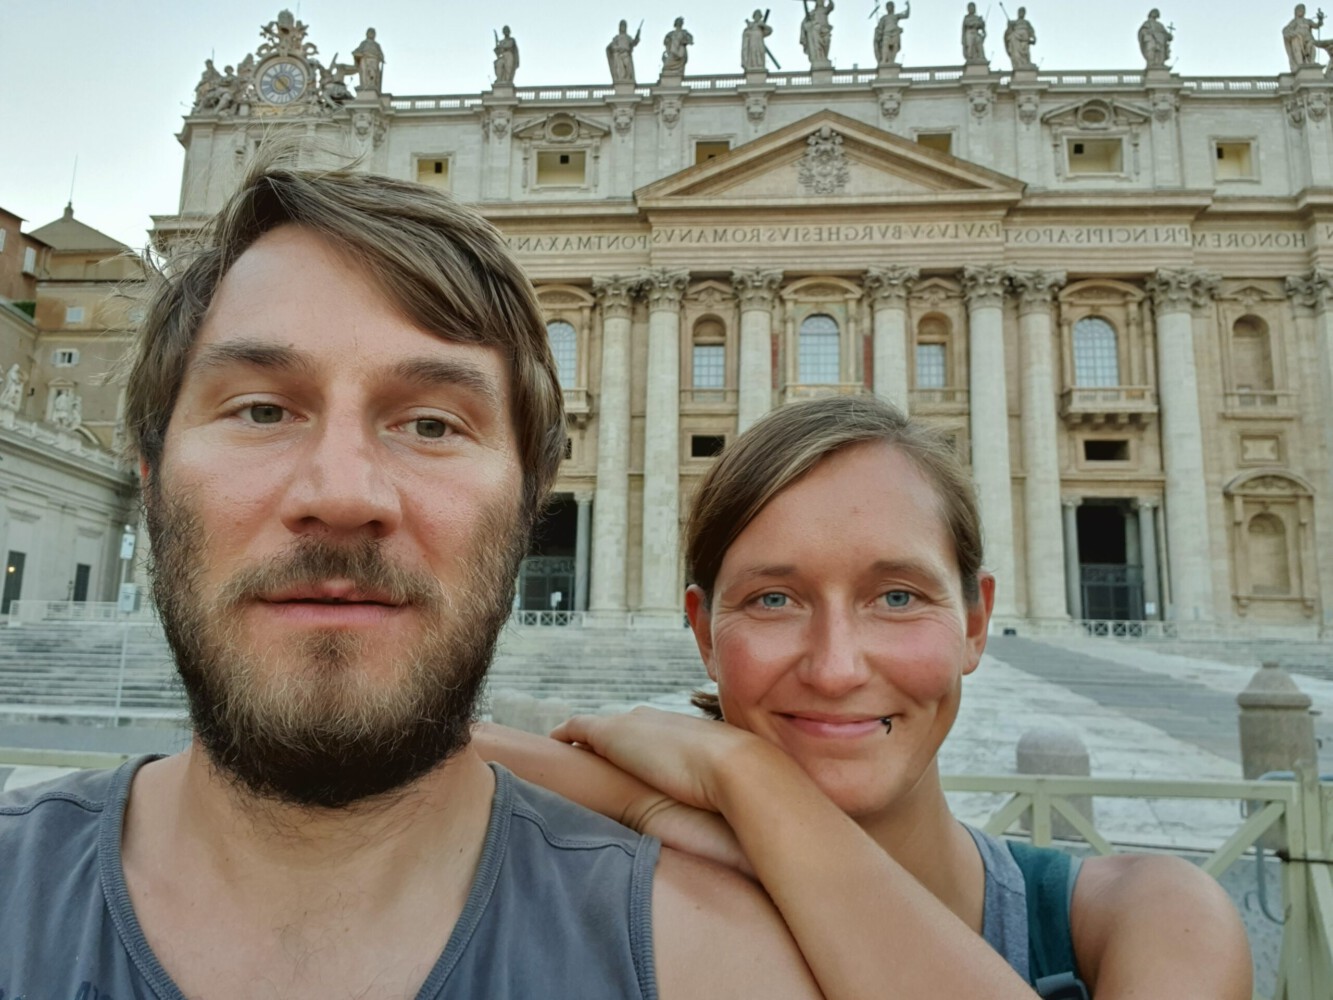 Selfie the second - the pope was not there :/